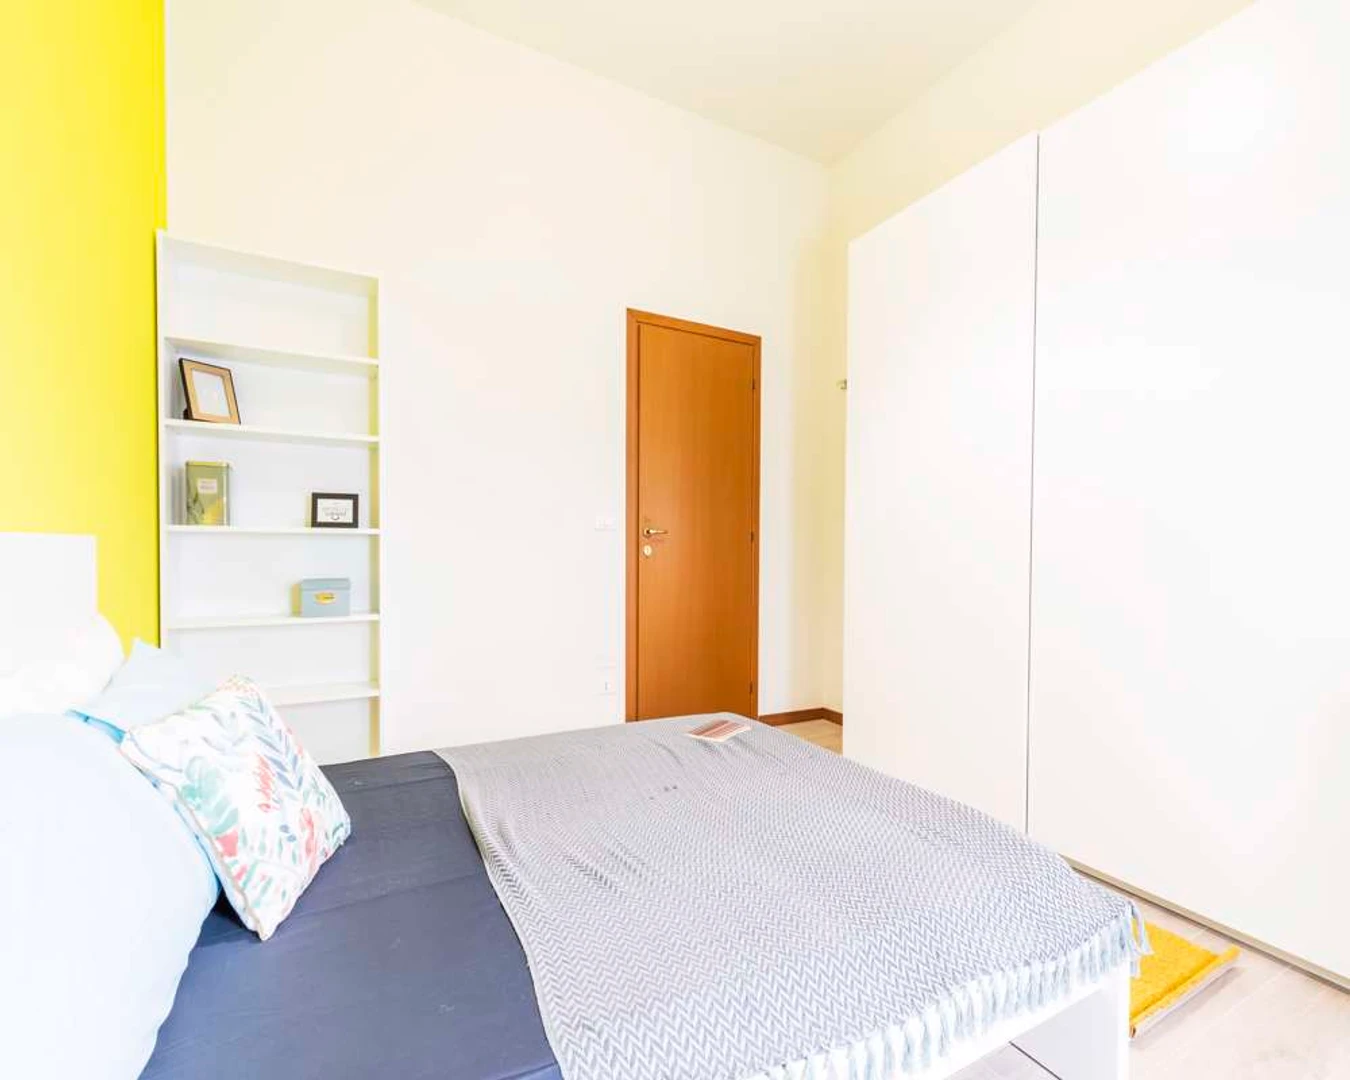 Room for rent in a shared flat in bologna